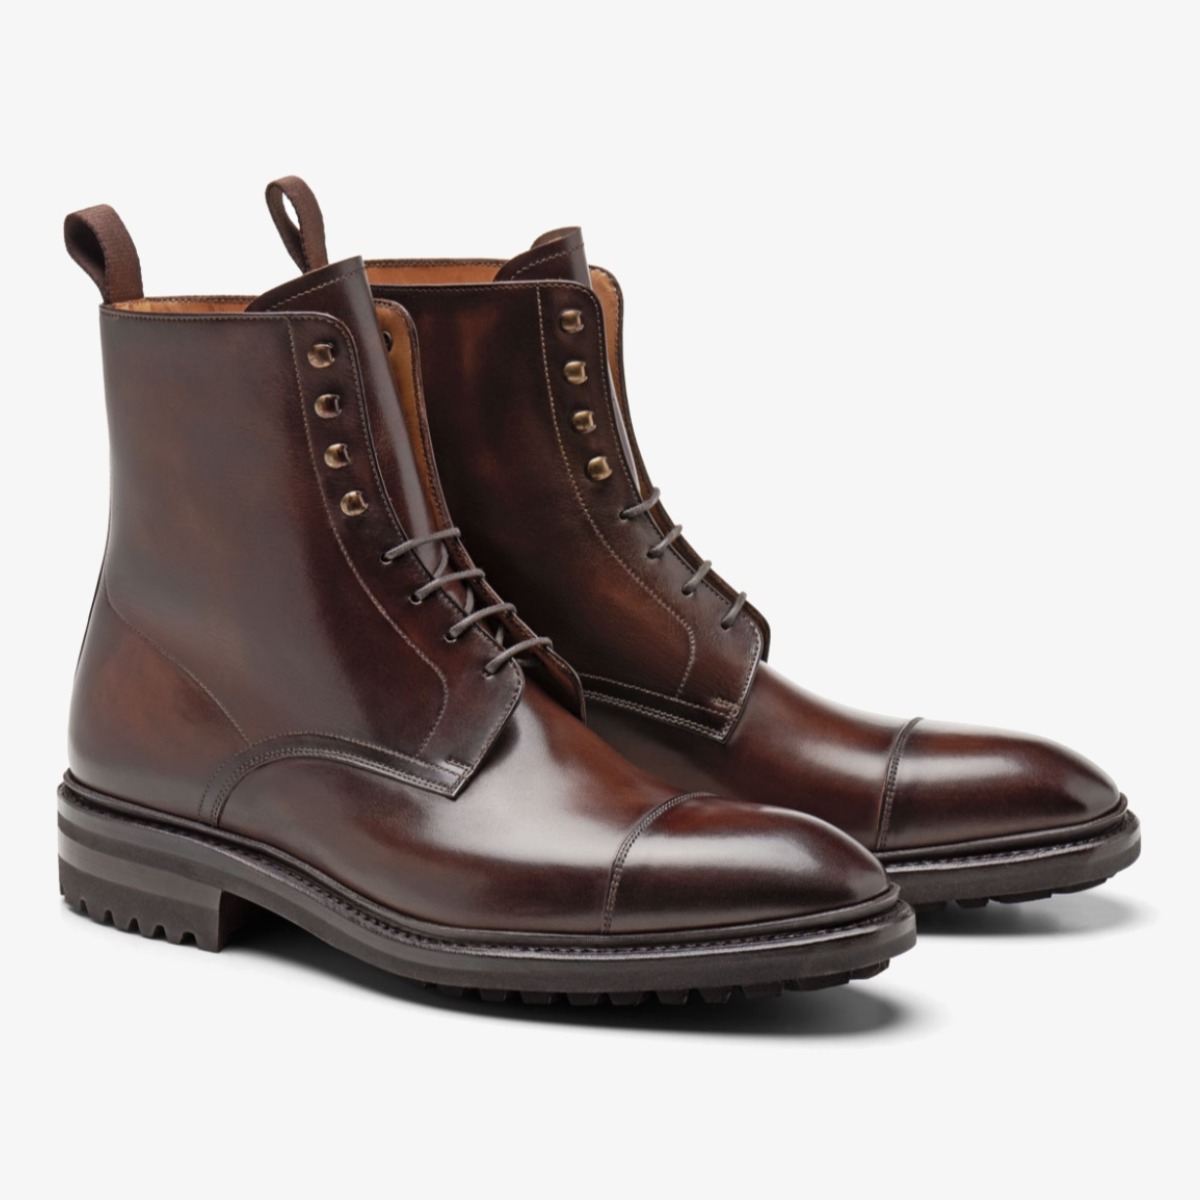 Carlos Santos 8866 Stallone coimbra lace-up boots